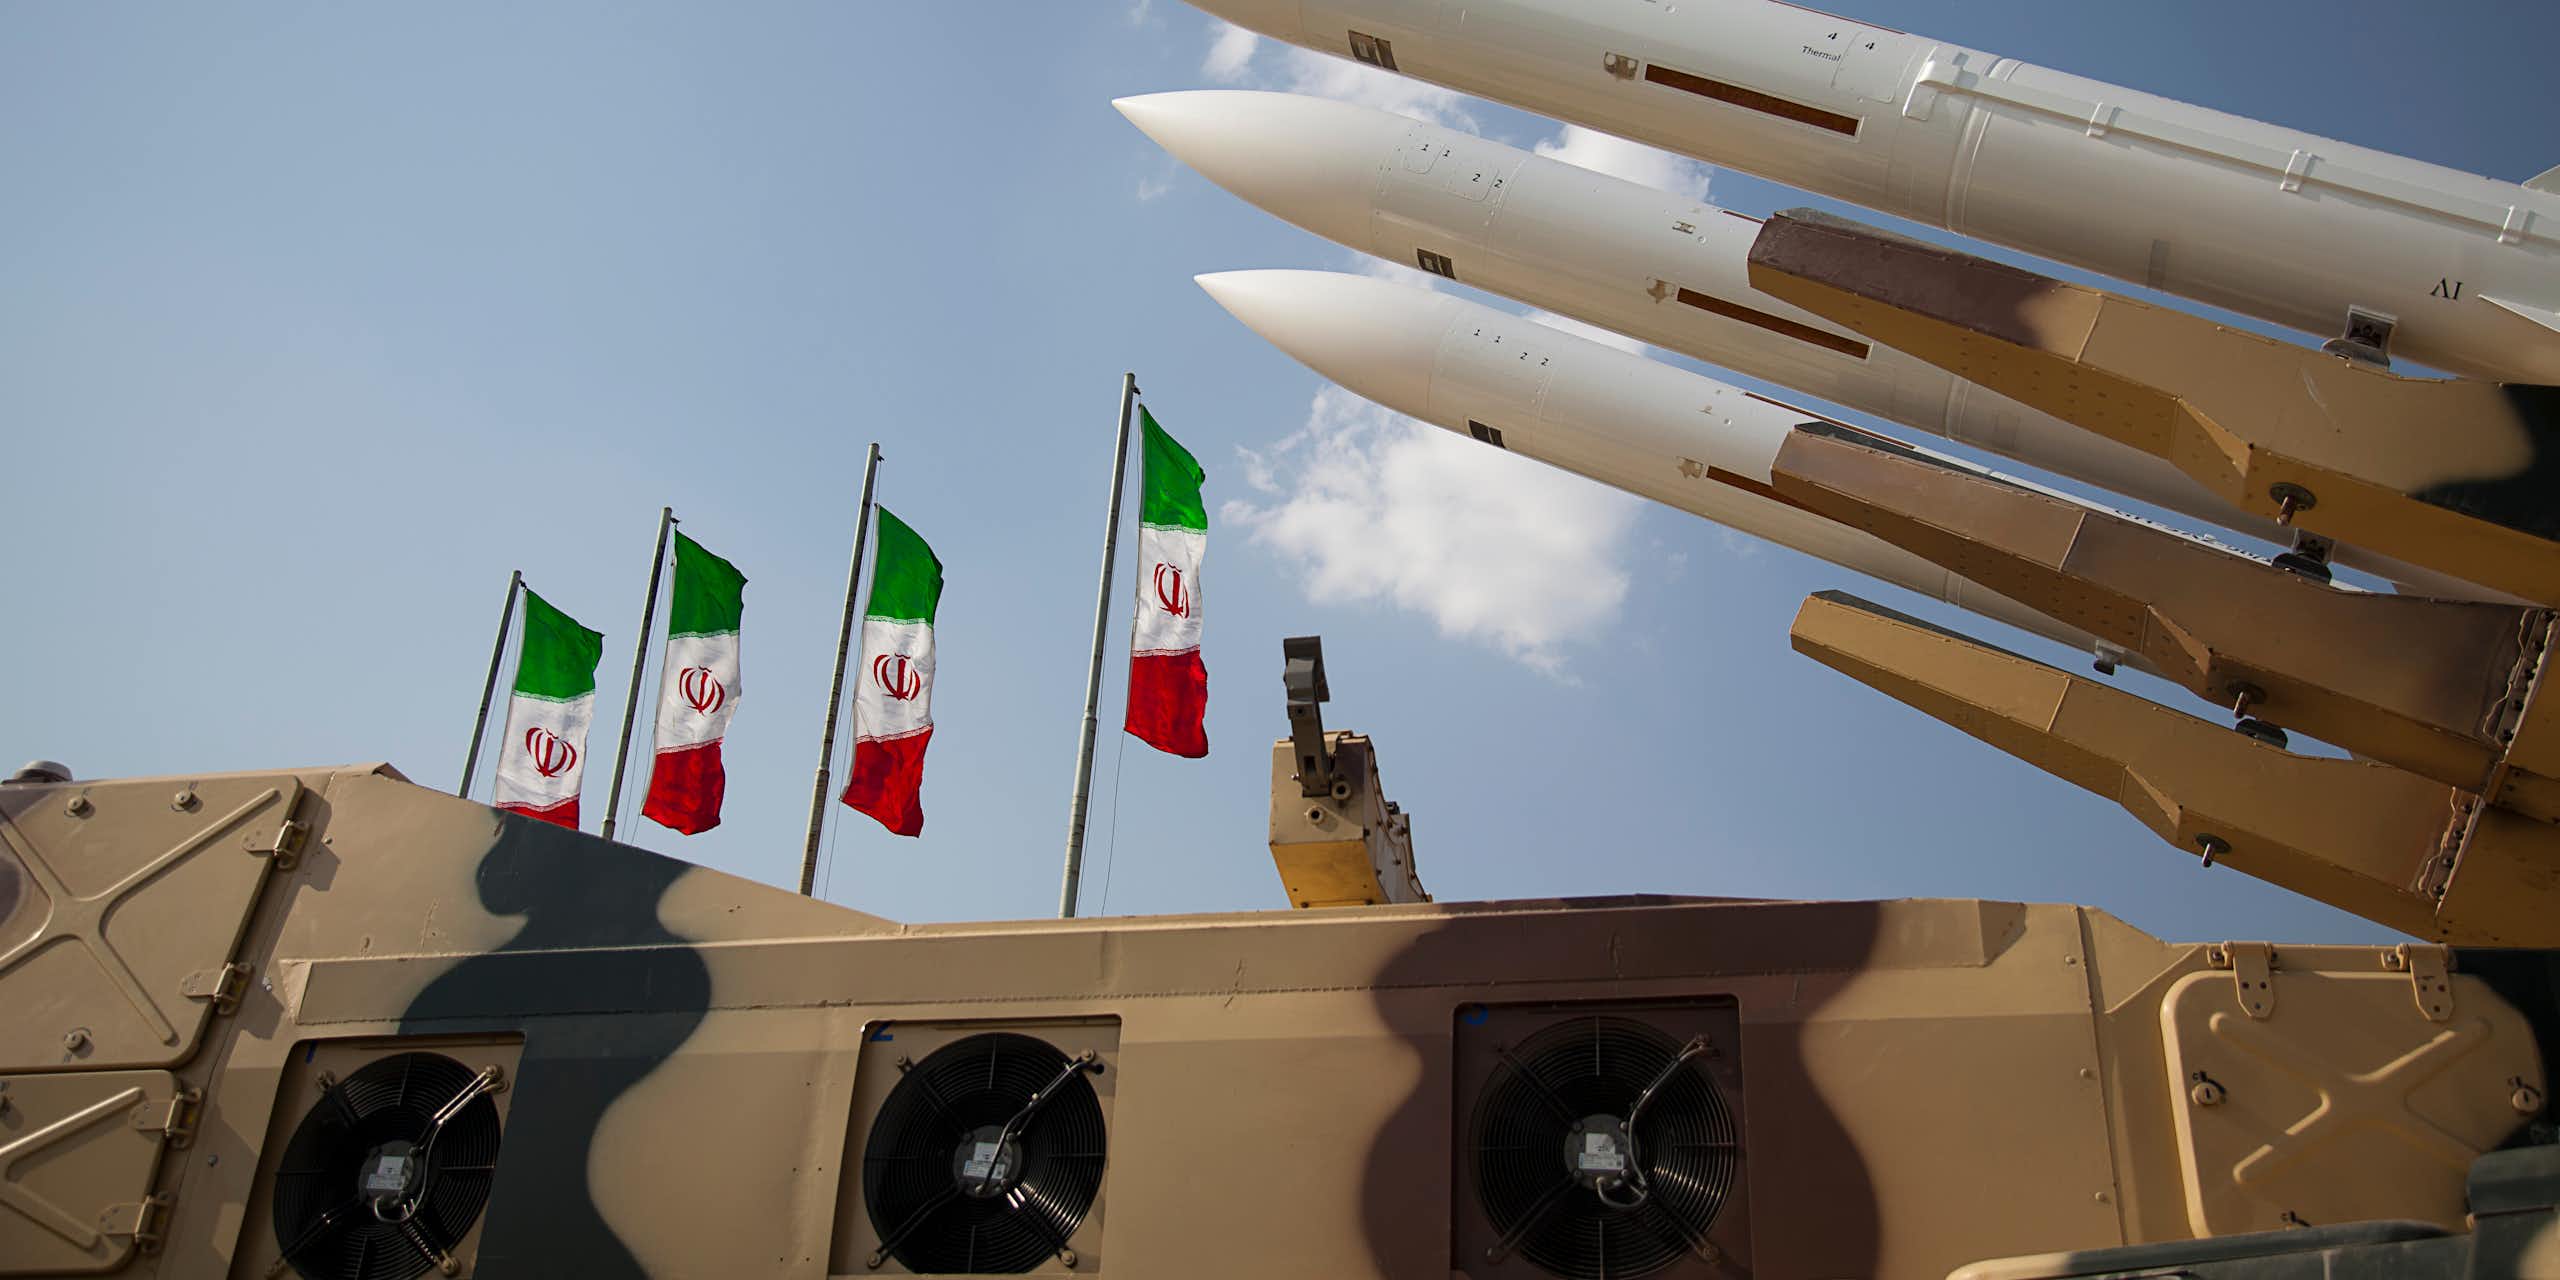 Three missiles pointing at the sky in front of four Iranian flags.